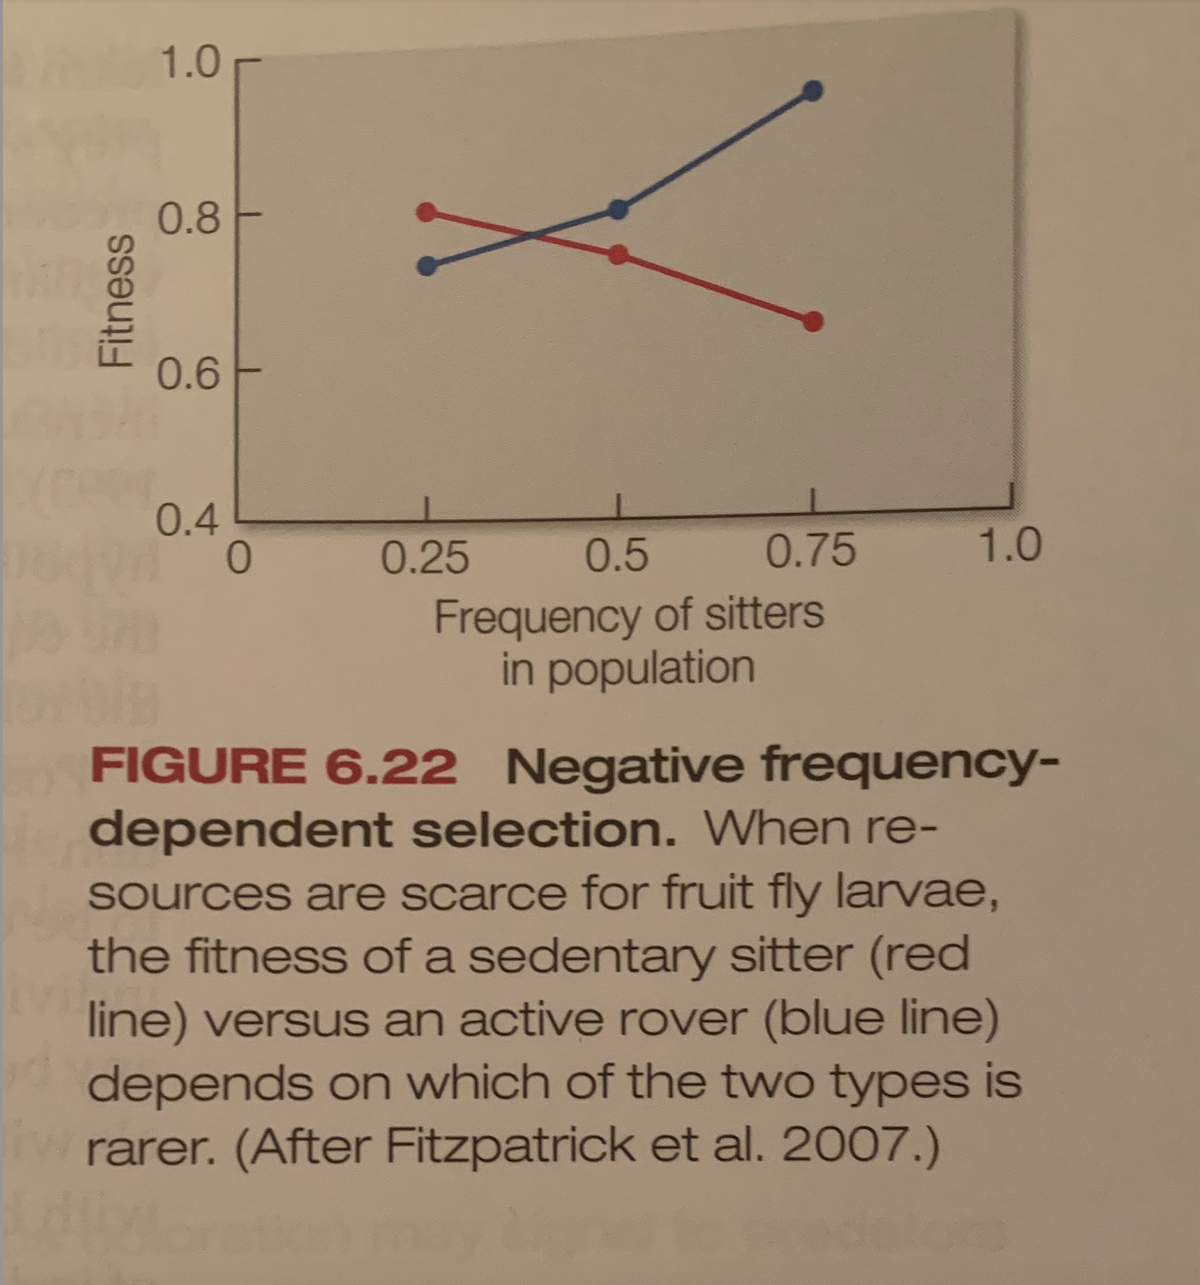 1.0 -
0.8
0.6 F
0.4
0.25
0.5
0.75
1.0
Frequency of sitters
in population
FIGURE 6.22 Negative frequency-
dependent selection. When re-
sources are scarce for fruit fly larvae,
the fitness of a sedentary sitter (red
line) versus an active rover (blue line)
depends on which of the two types is
rarer. (After Fitzpatrick et al. 2007.)
Fitness
